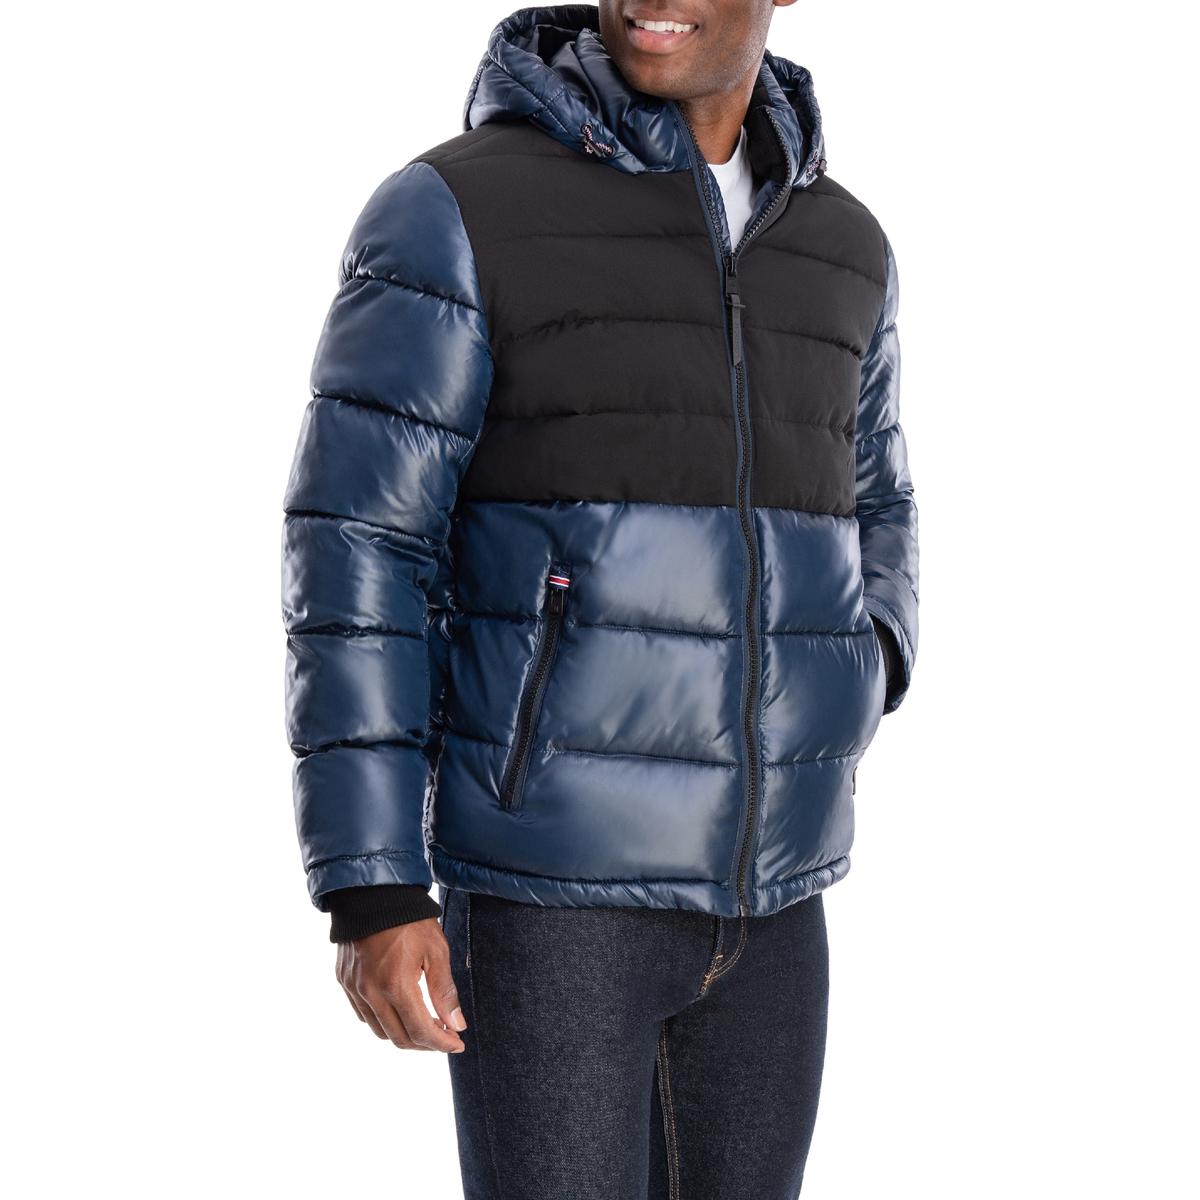 London Fog Men's Mixed Media Insulated Puffer Jacket with Attached